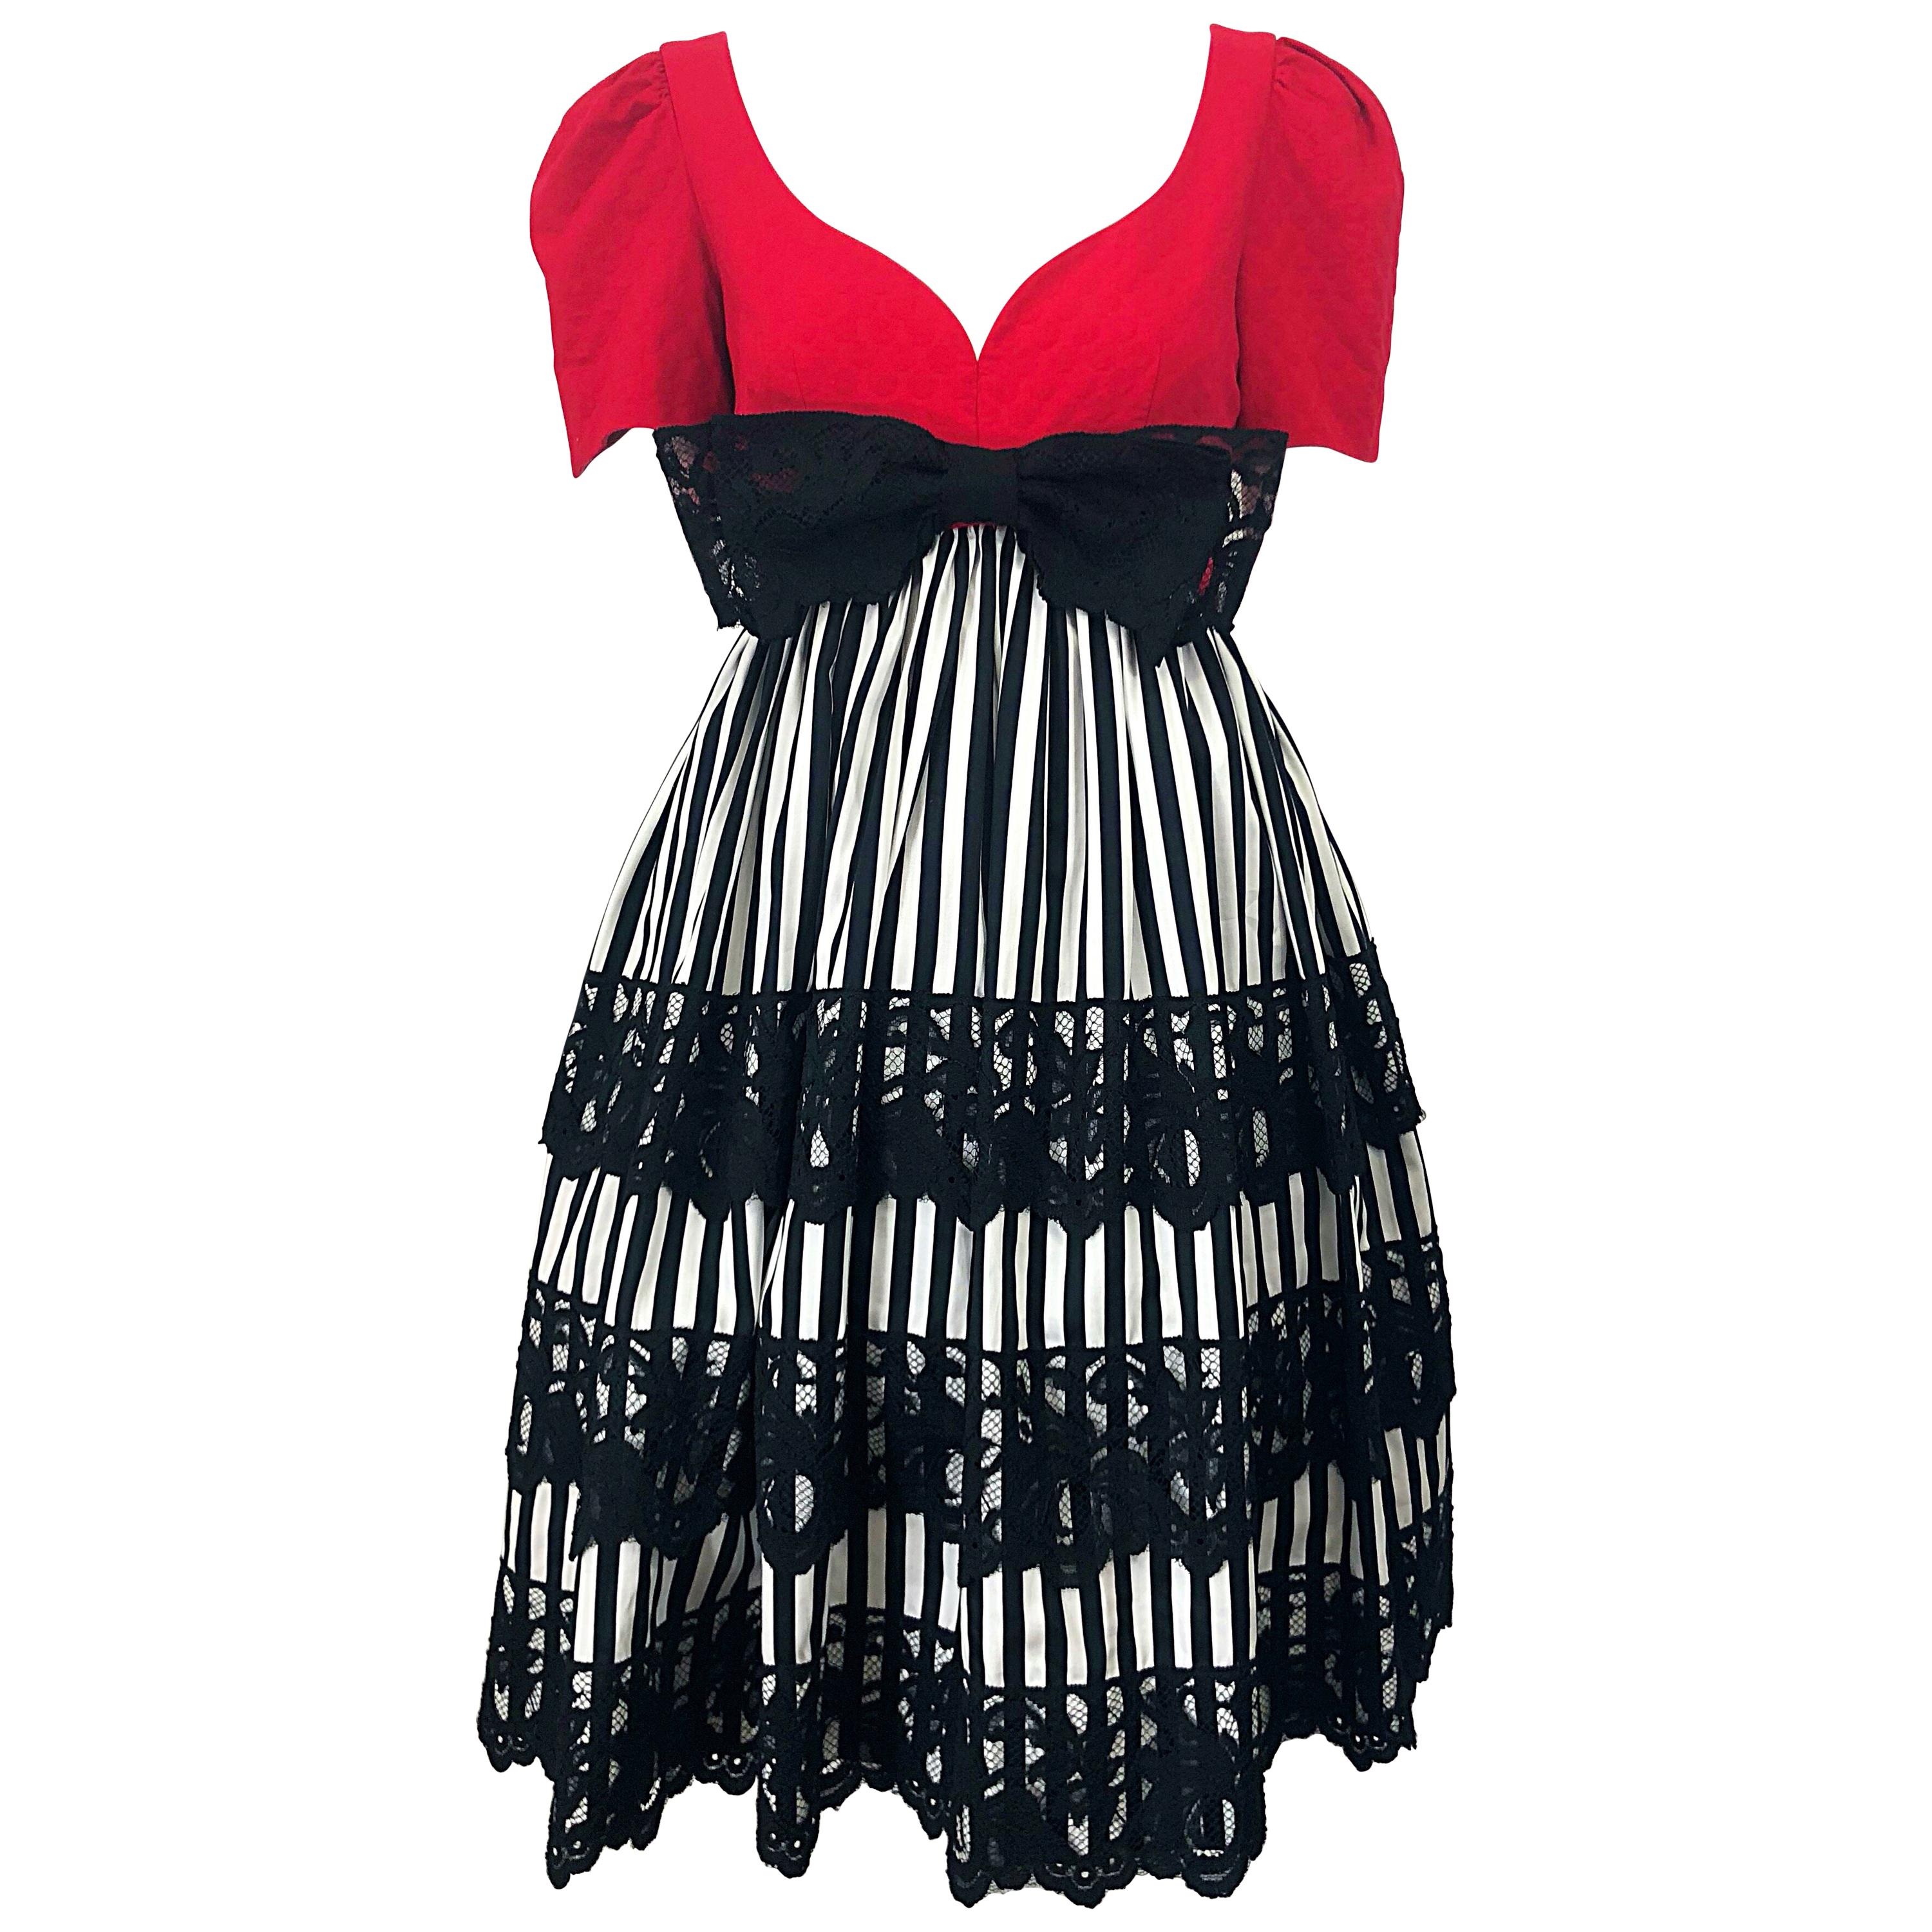 Vintage Adele Simpson 1980s Red Black White Fit n' Flare Empire Bow Lace Dress For Sale